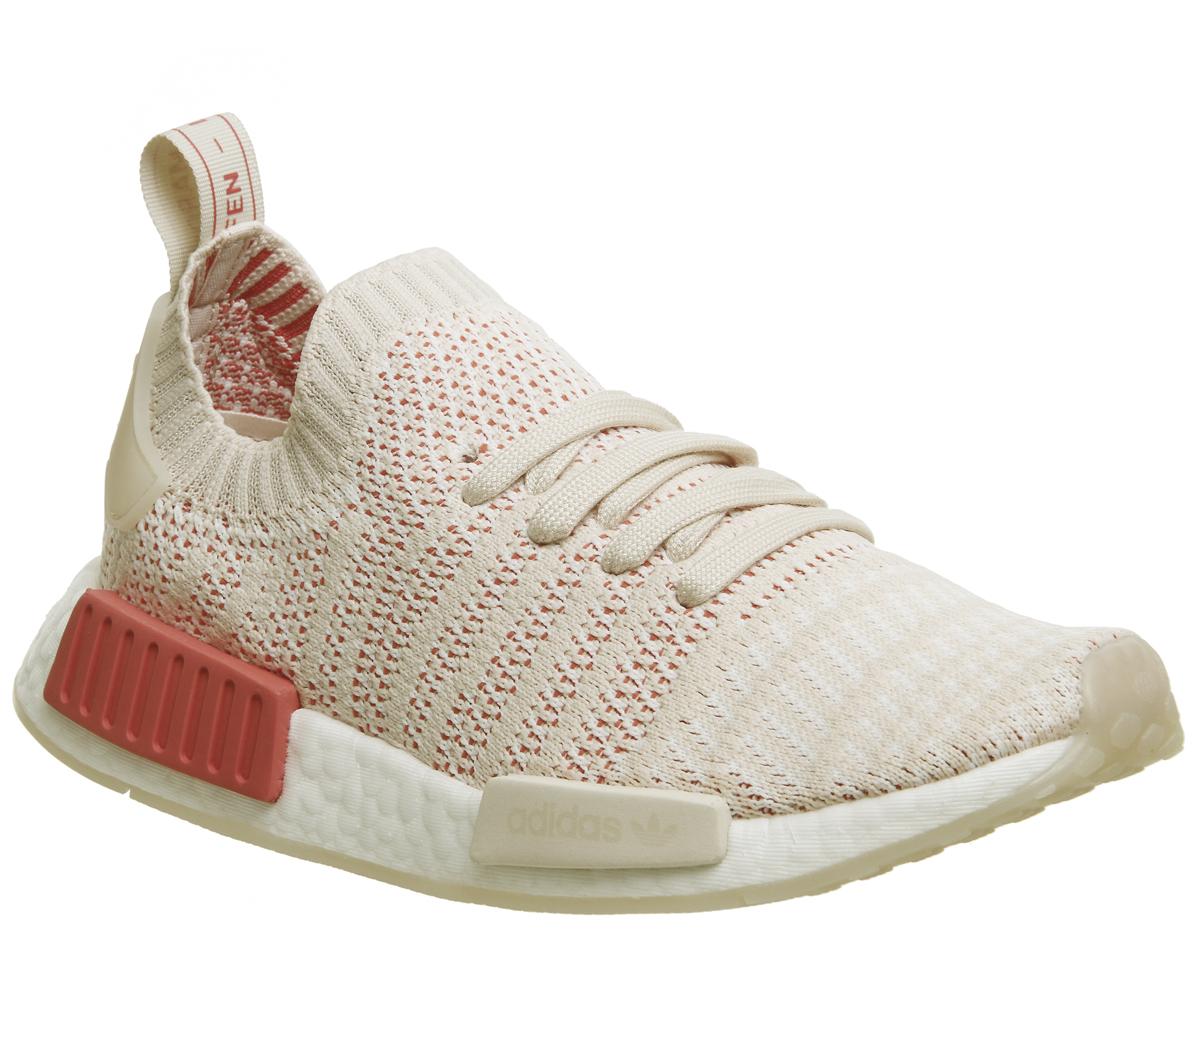 adidas Nmd R1 Prime Knit Trainers Linen 